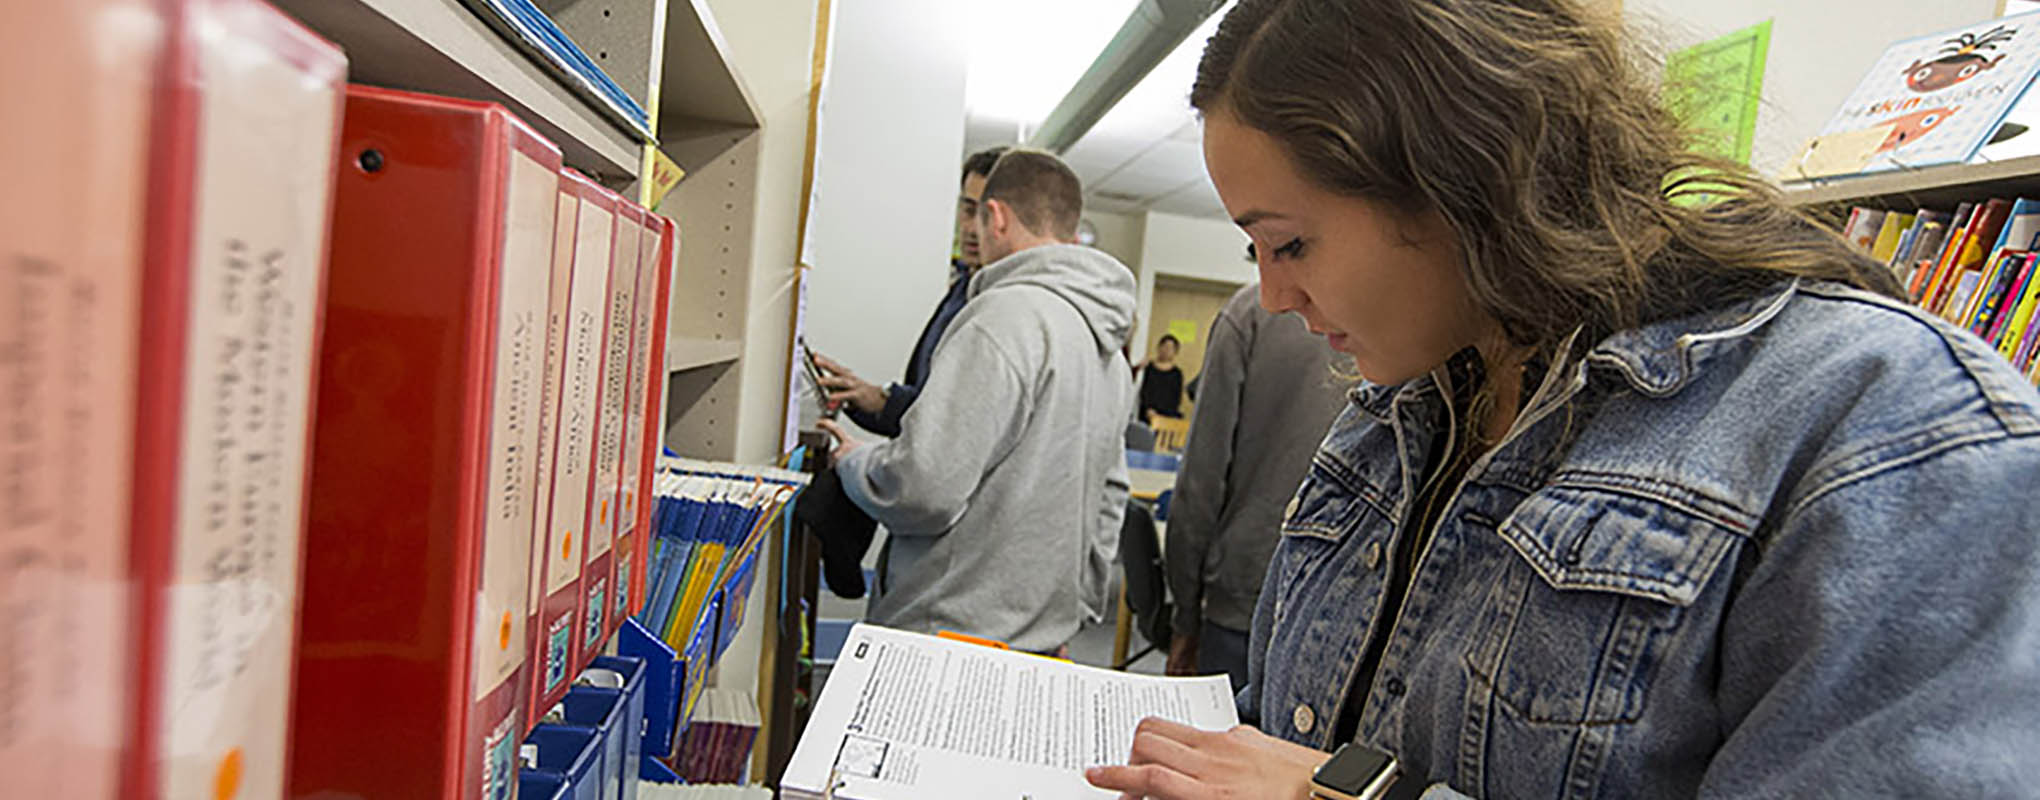 Female student reads book in library aisle